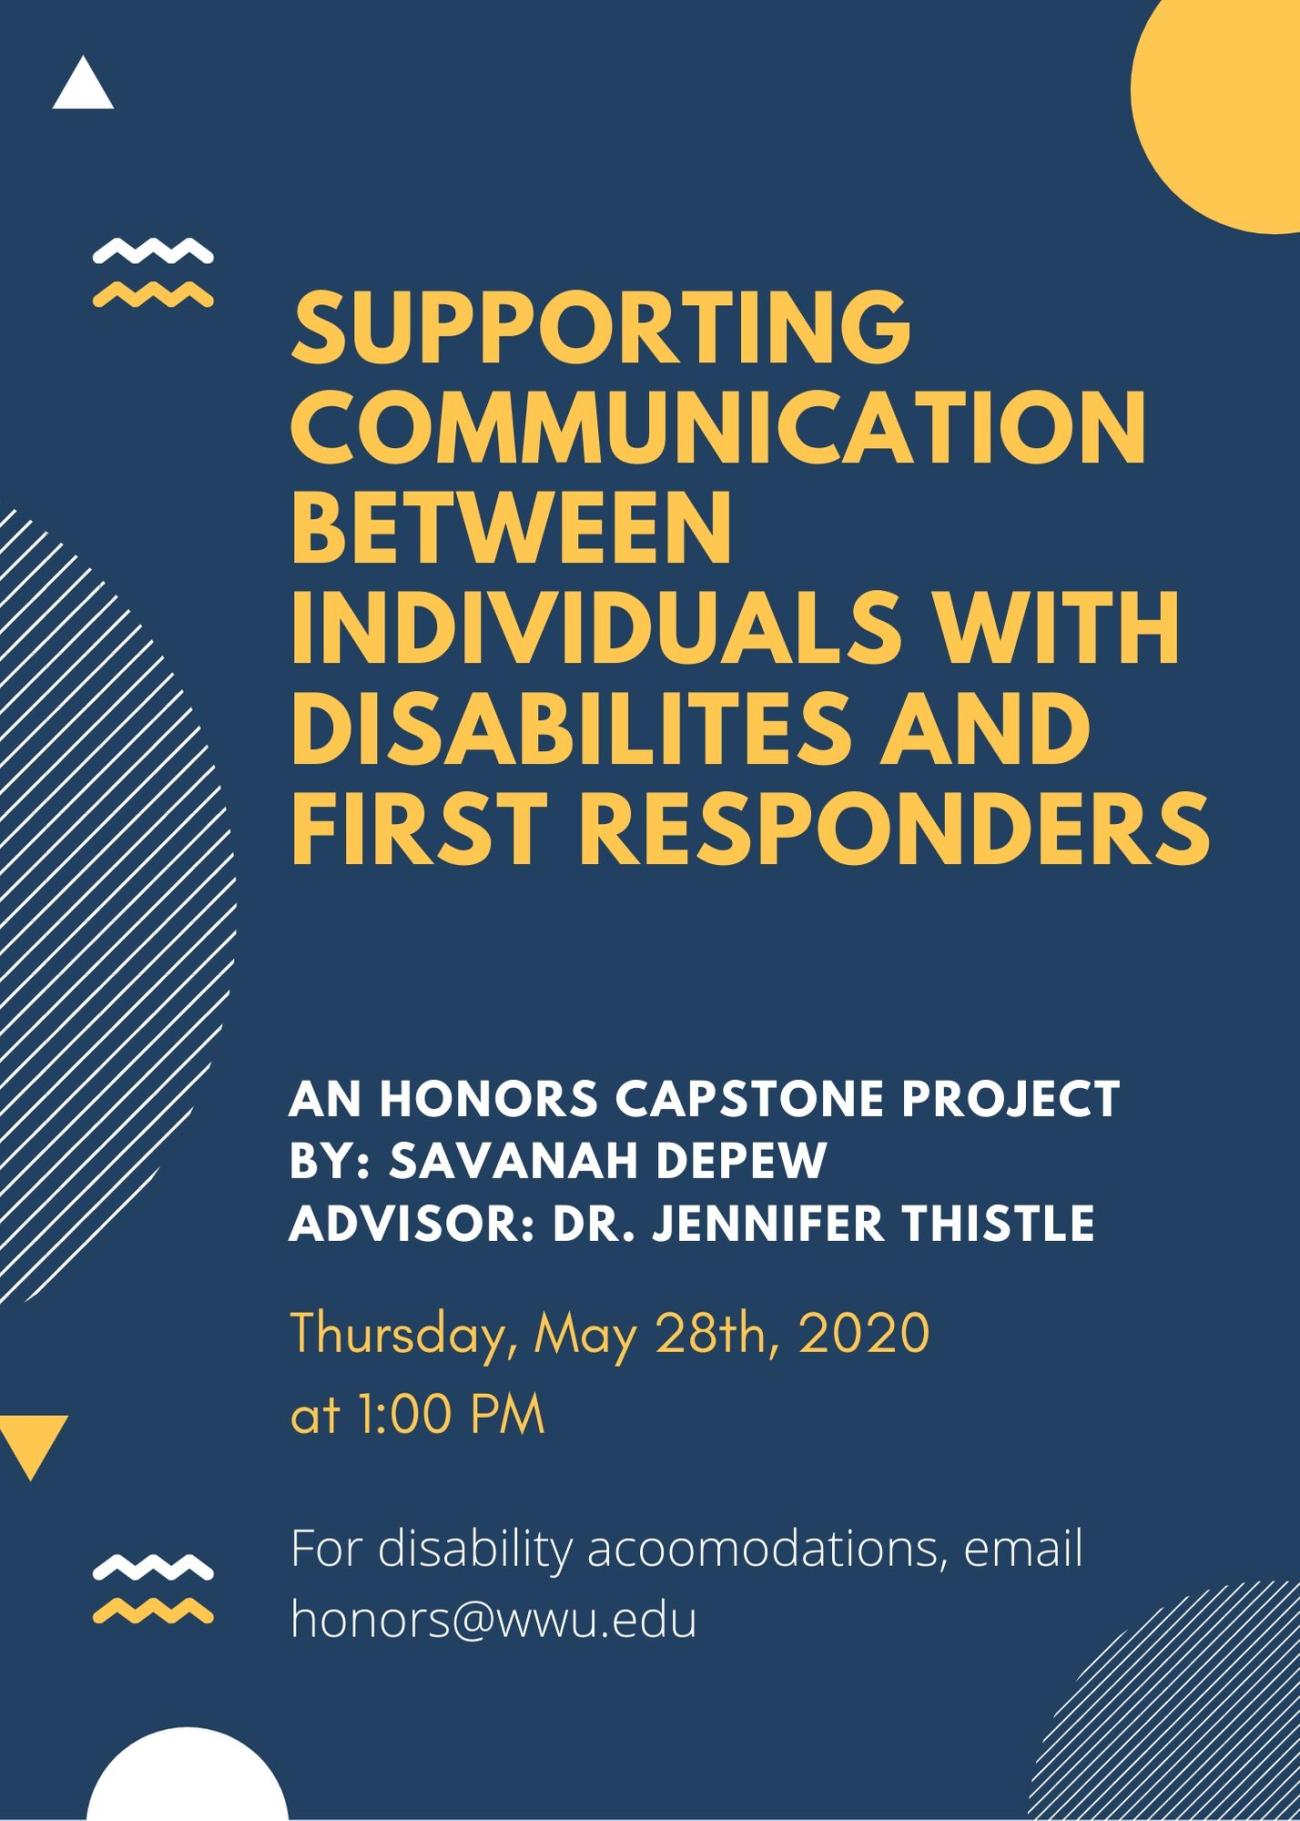 Supporting Communication Between Individuals With Disabilities and First Responders